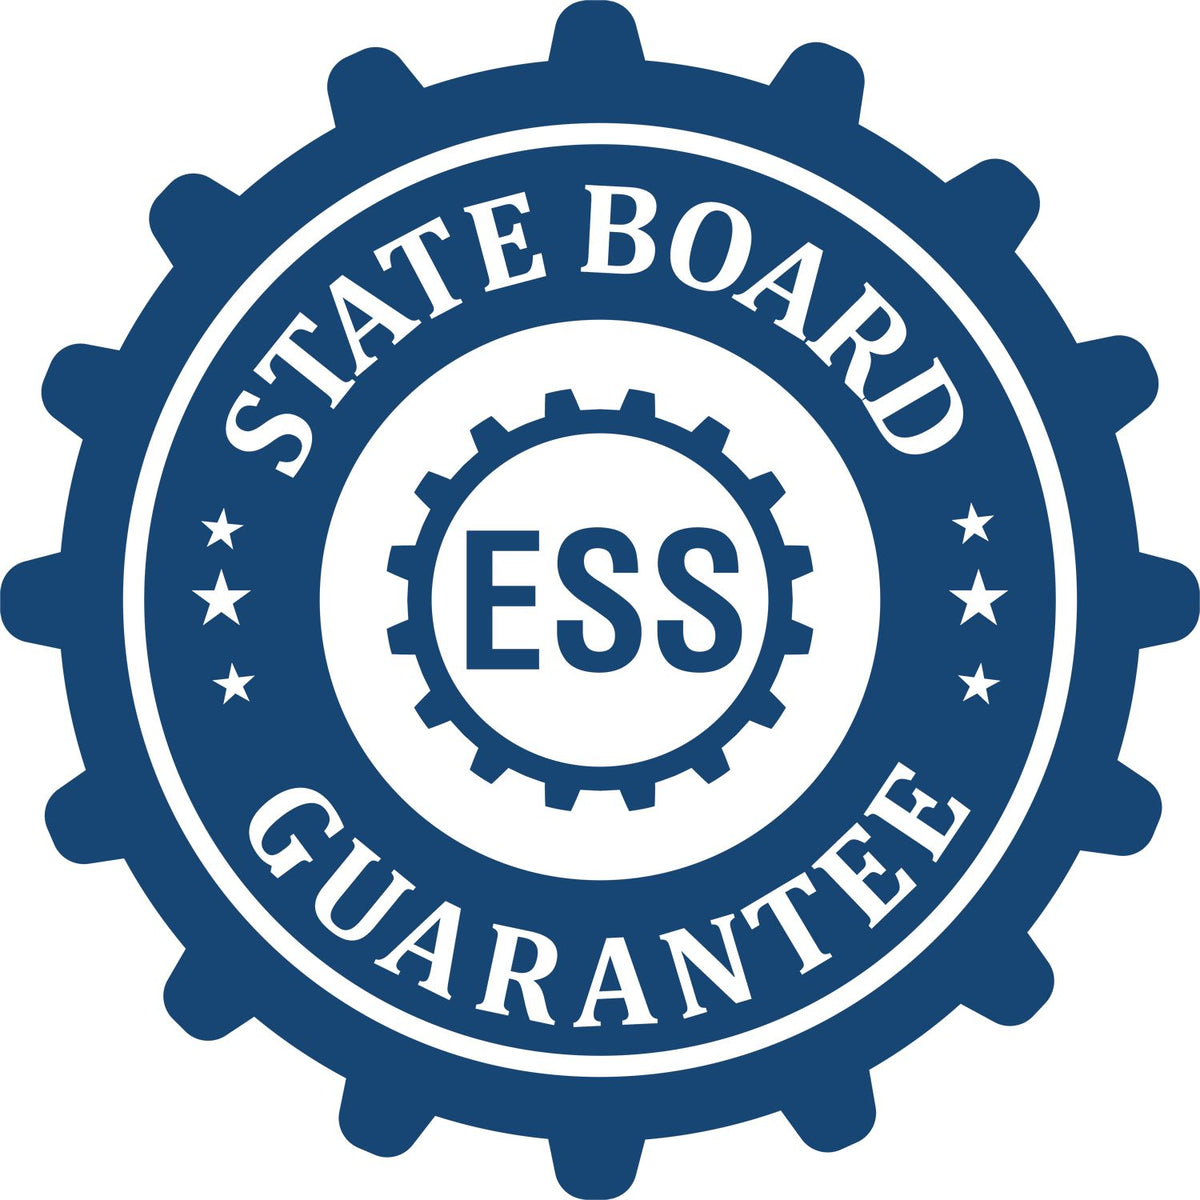 An emblem in a gear shape illustrating a state board guarantee for the Alabama Landscape Architectural Seal Stamp product.